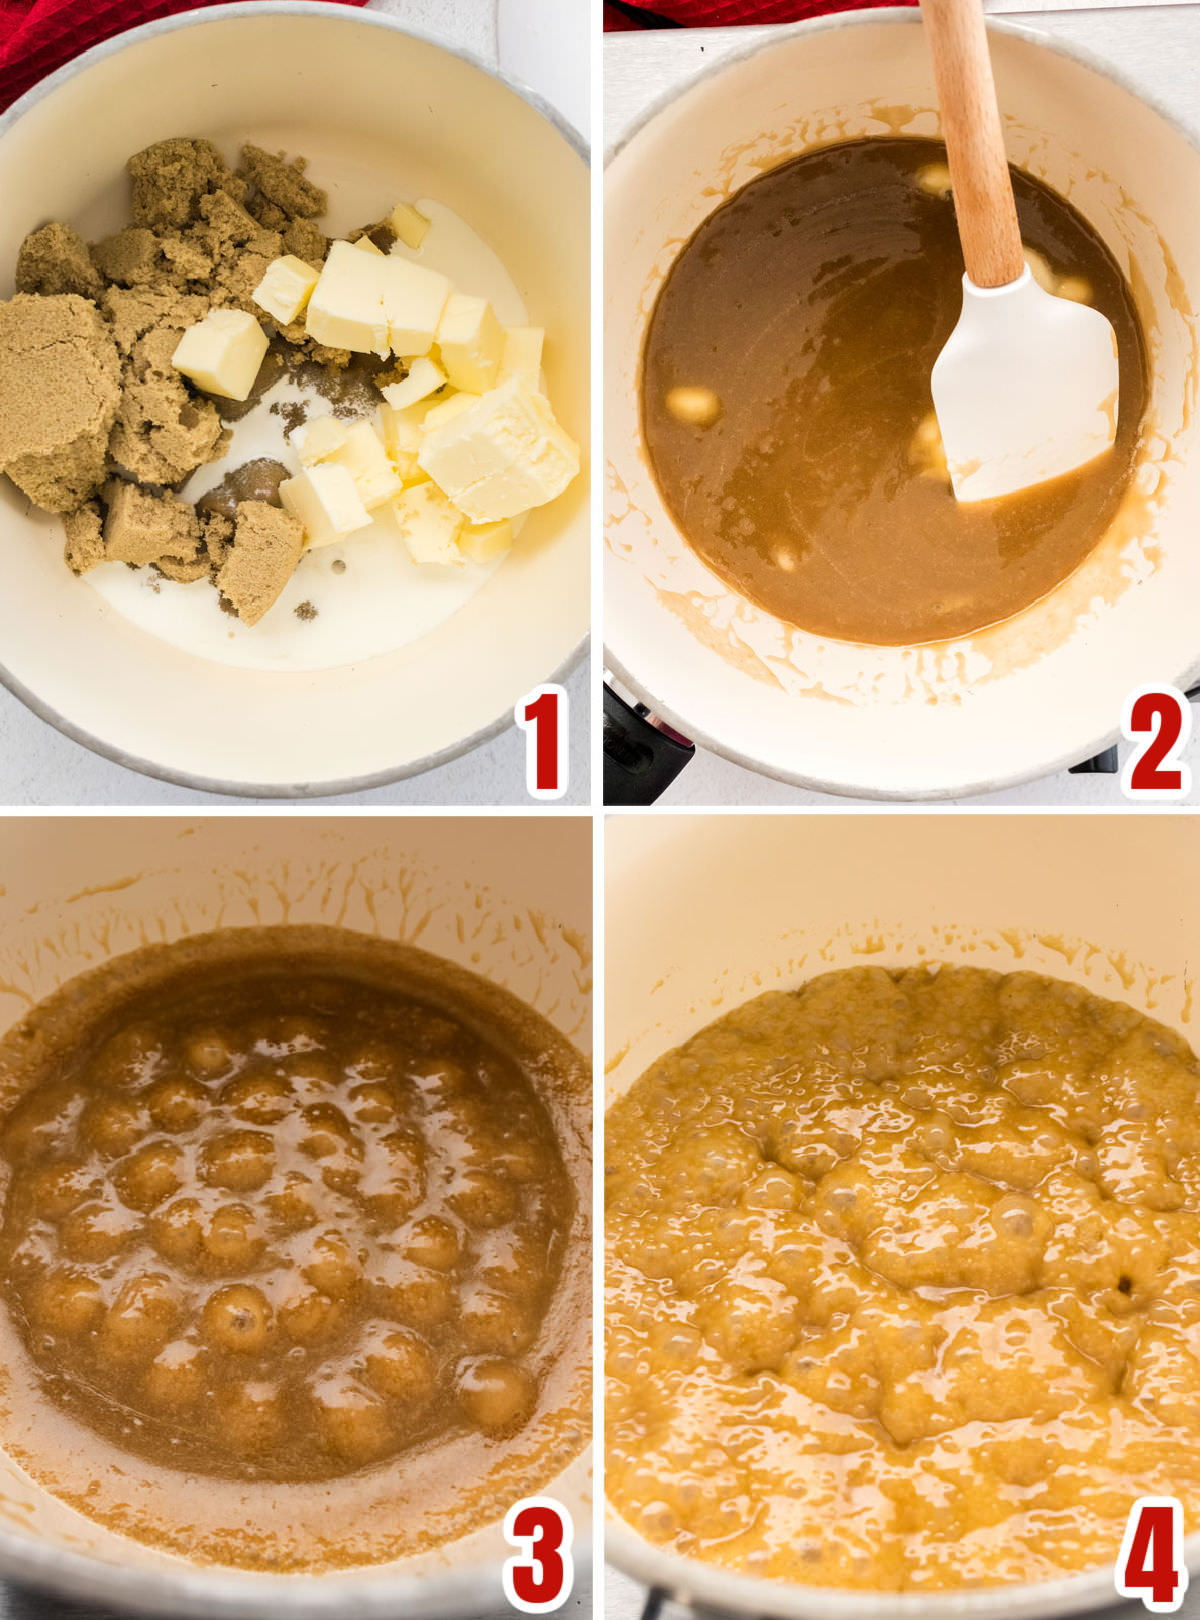 Collage image showing the steps for making a homemade caramel sauce.